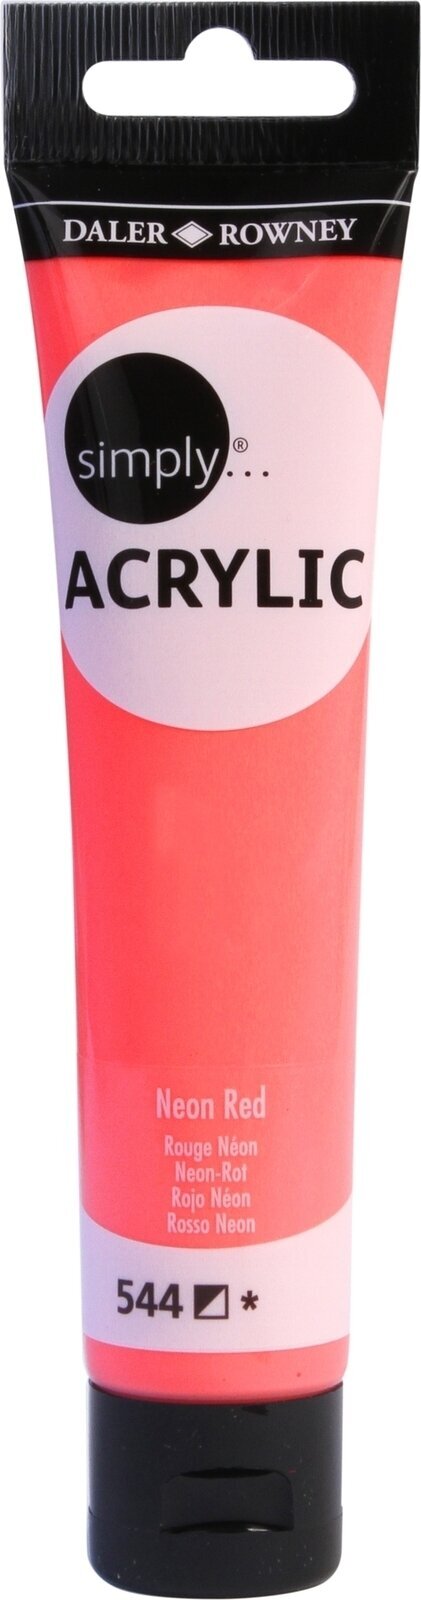 Acrylic Paint Daler Rowney Simply Acrylic Paint Neon Red 75 ml 1 pc